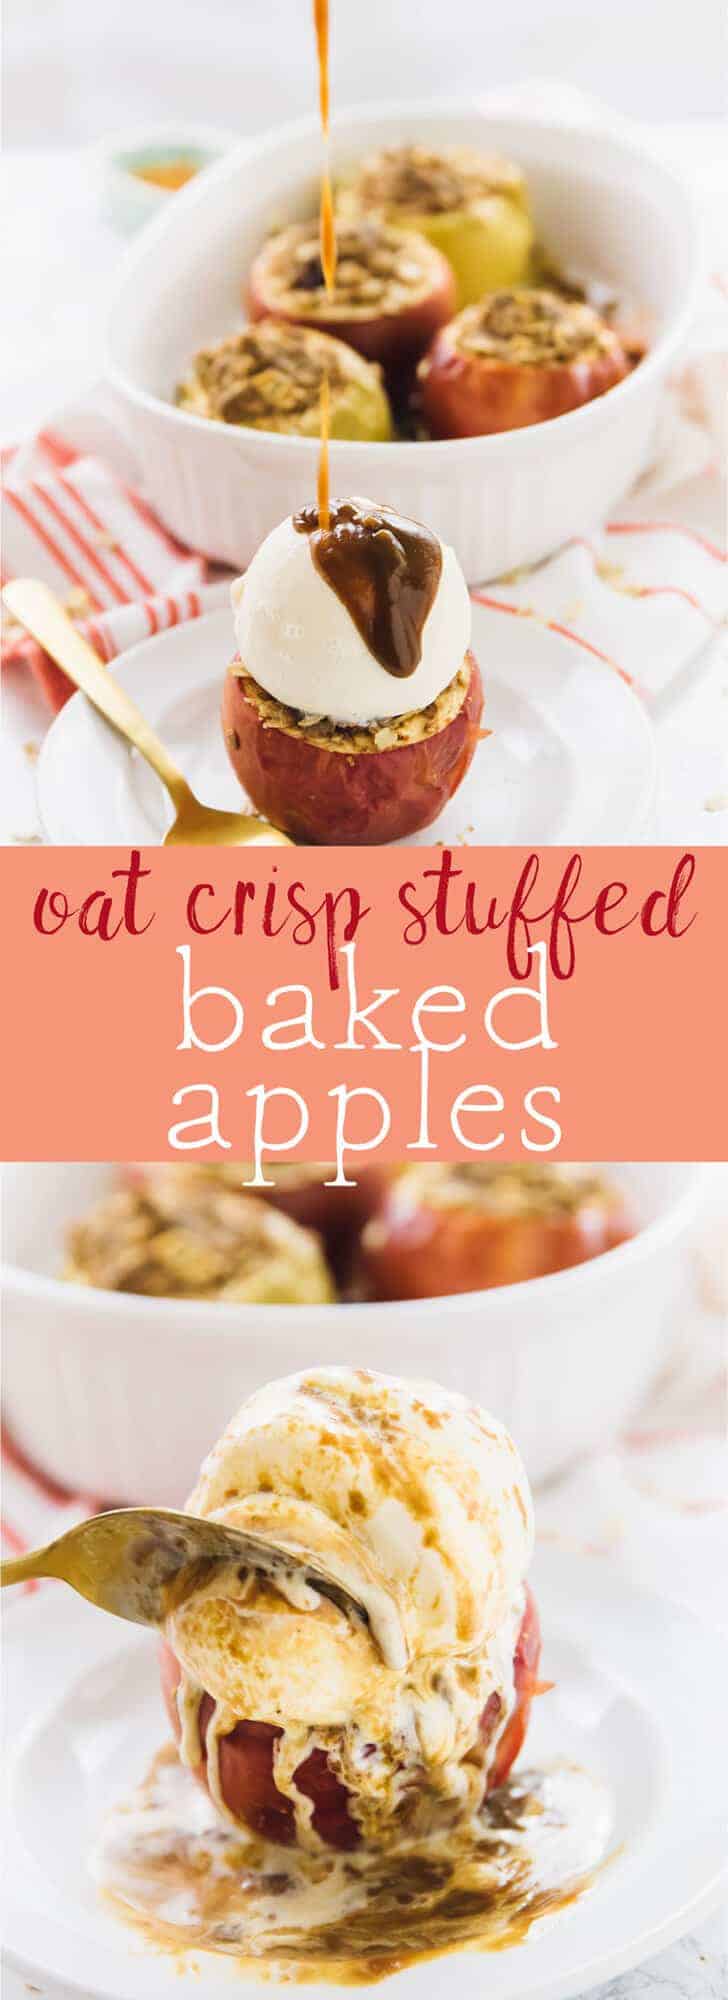 These Baked Apples are perfect for fall and anytime you want a delicious and easy dessert! It's stuffed with a warm, crunchy yet soft cinnamon oat crisp! via https://jessicainthekitchen.com 